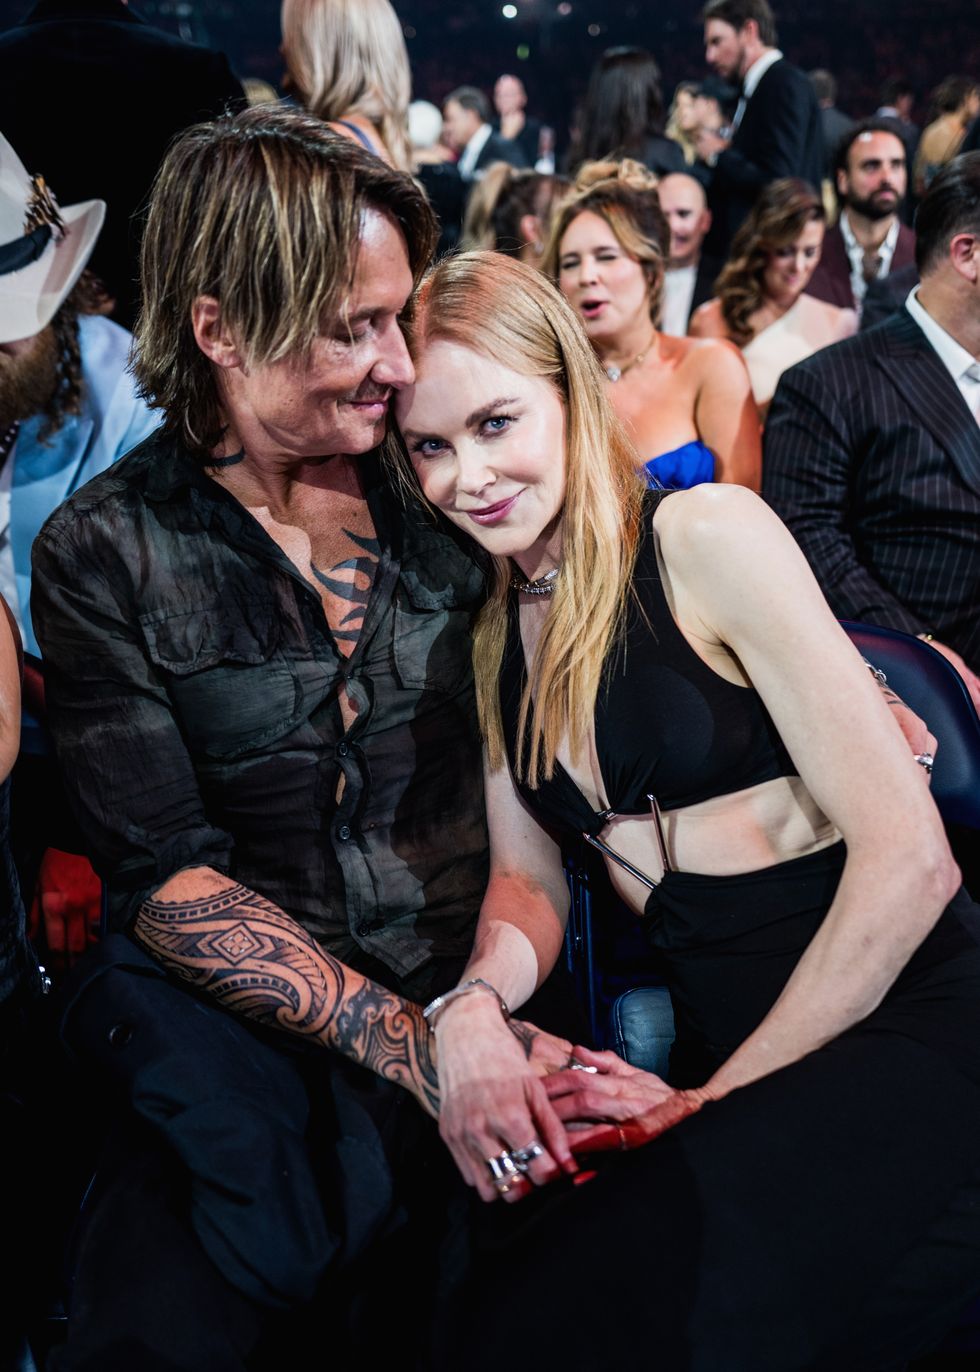 nashville, tennessee november 08 keith urban and nicole kidman attend the 57th annual country music association awards at bridgestone arena on november 08, 2023 in nashville, tennessee photo by john shearergetty images for cma